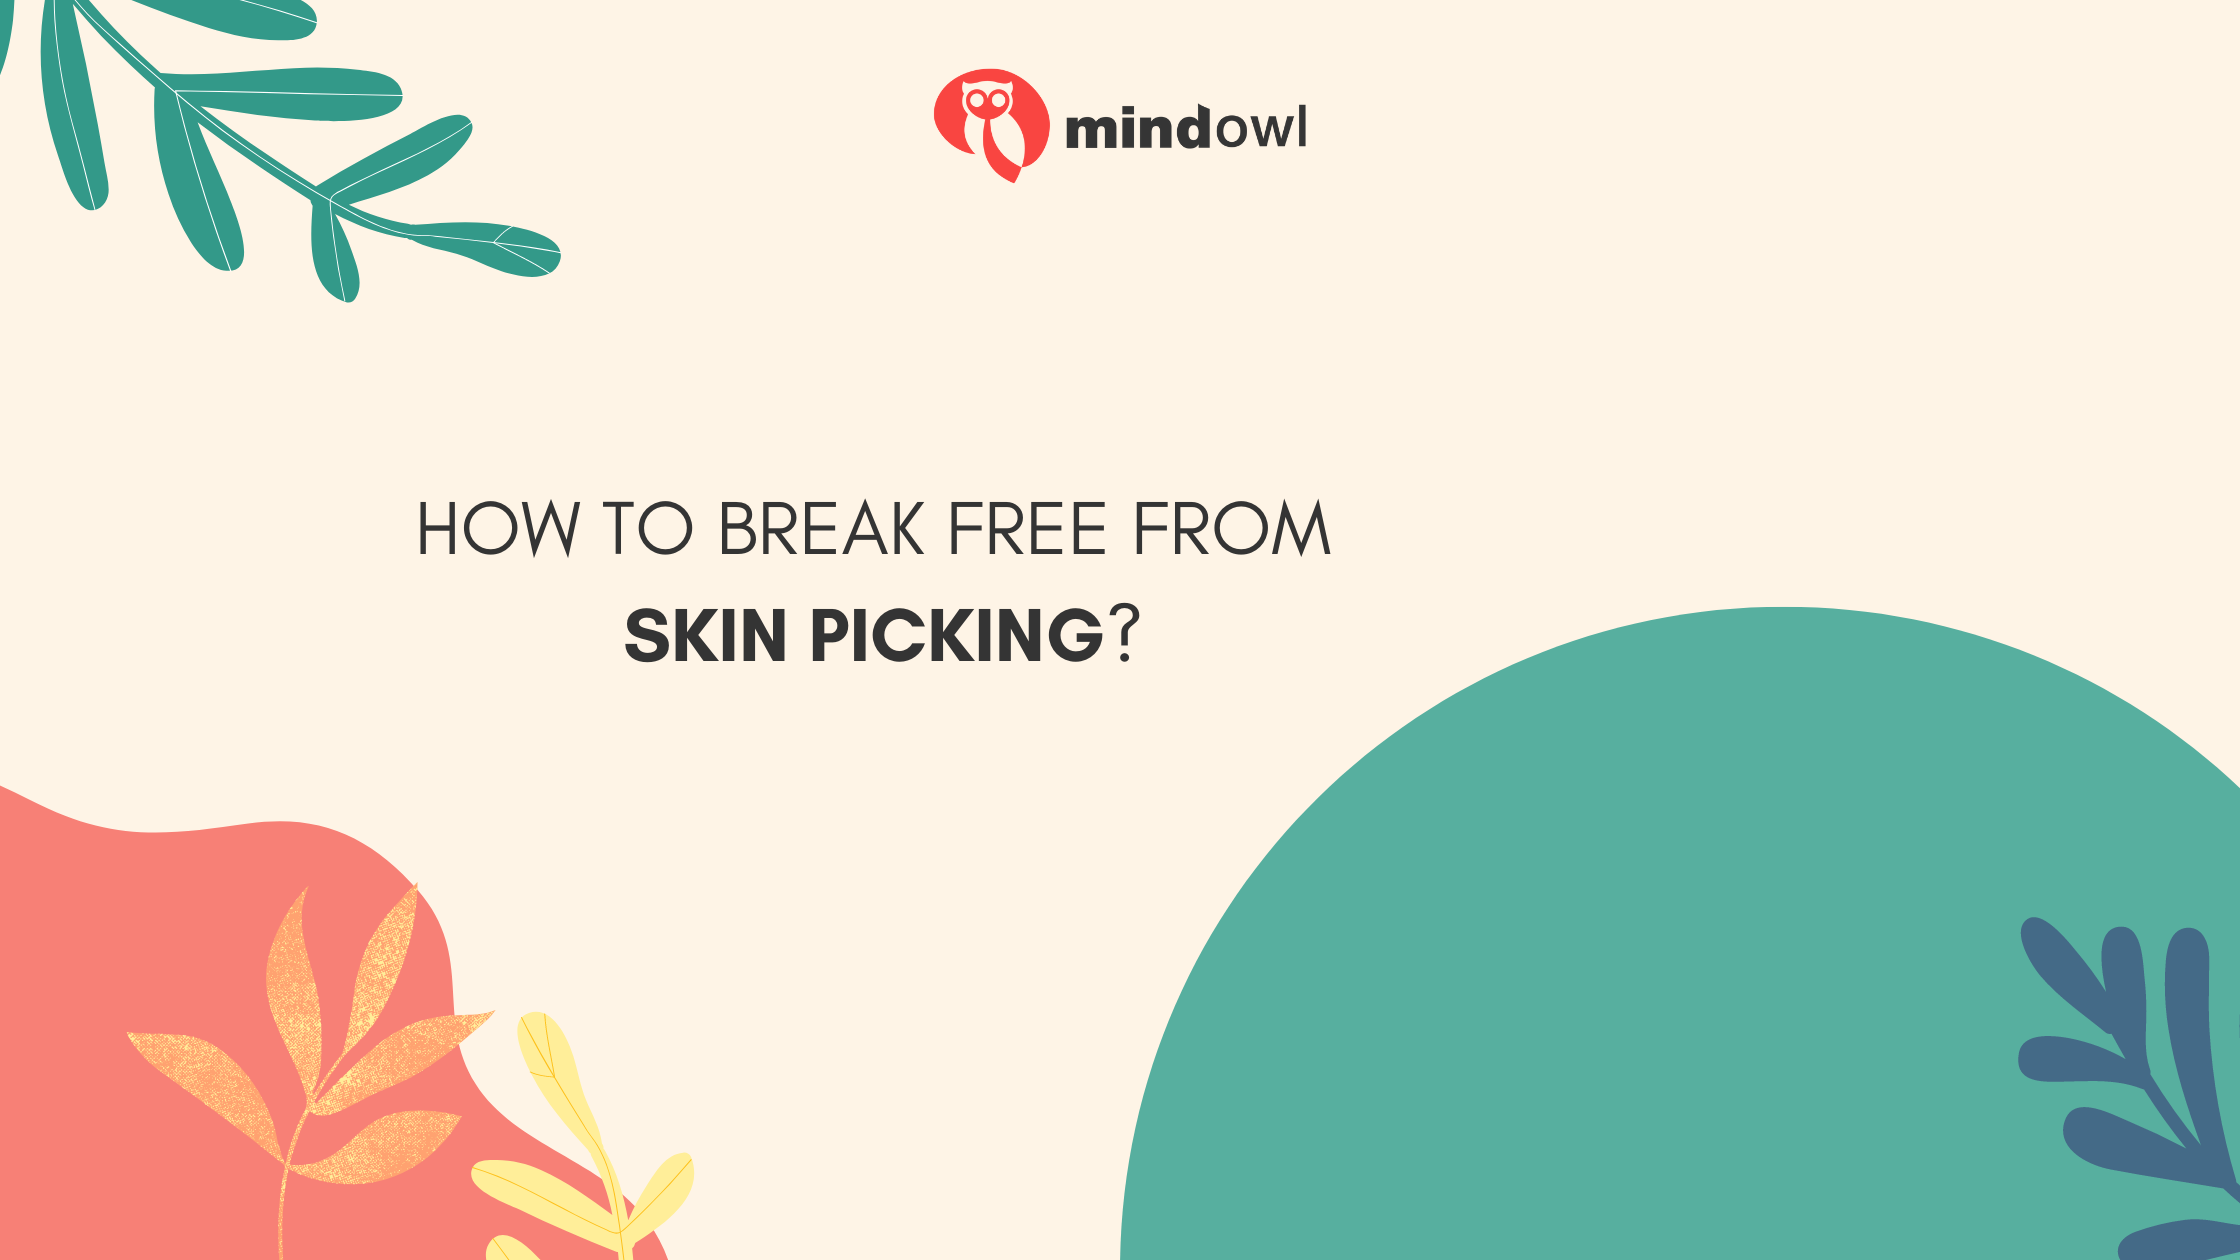 How to Break Free from Skin Picking?